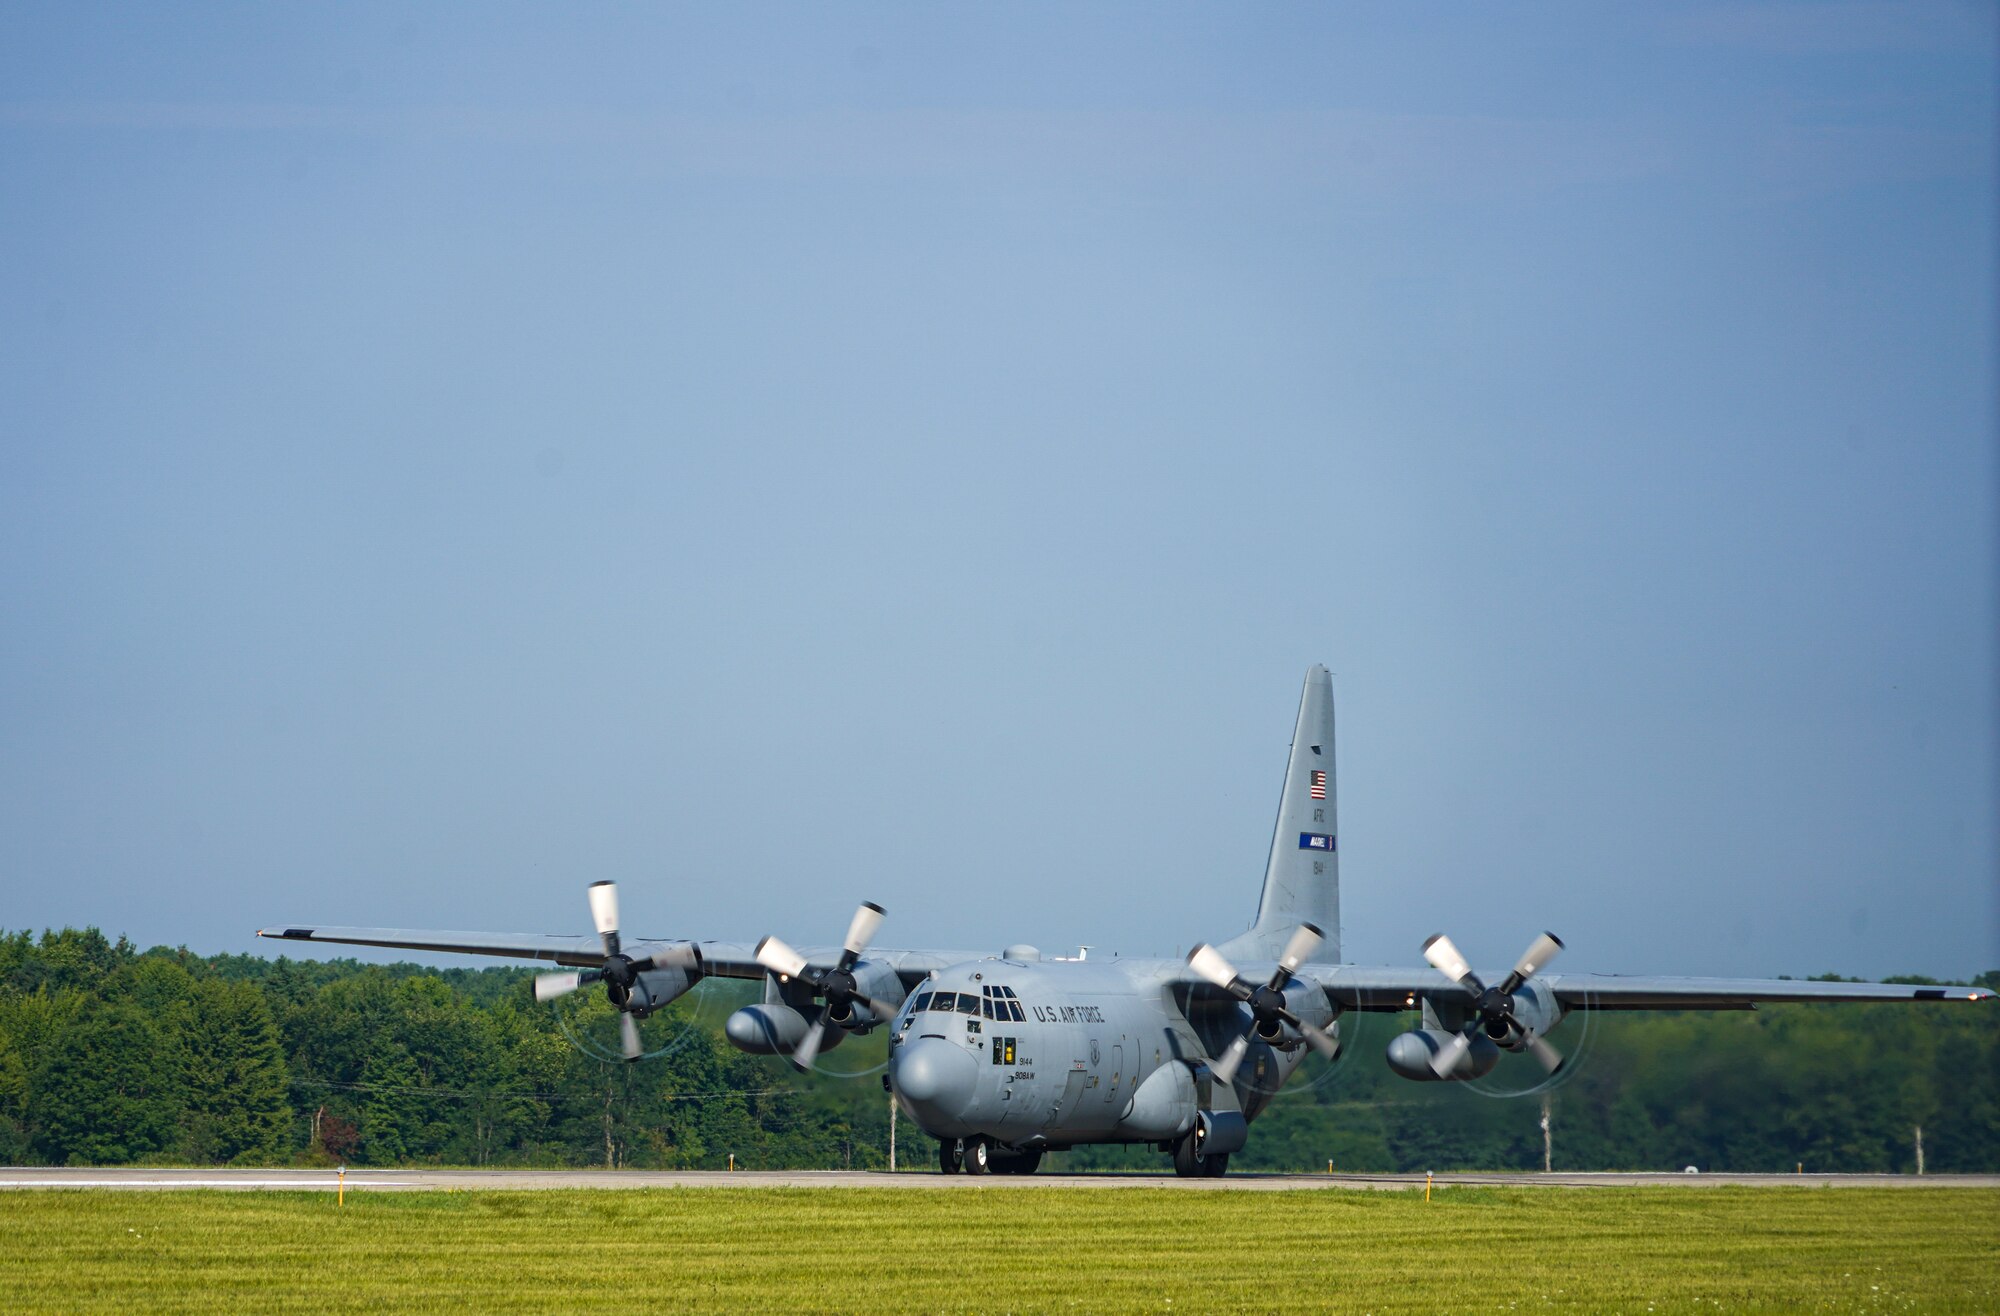 A C-130H Hercules assigned to the 908th Airlift Wing, Maxwell Air Force Base, Alabama, takes off from the flightline on Aug. 23, 2020, at Youngstown Air Reserve Station in Vienna, Ohio. Five Air Force Reserve units from the 22nd Air Force and a West Virginia Air National Guard unit participated in Rally in the Valley, a multi-day C-130 training exercise under a distributed operations concept, Aug. 22-25, 2020. The exercise included cargo drops, high-altitude paratrooper drops, task force resupply and personnel extraction.